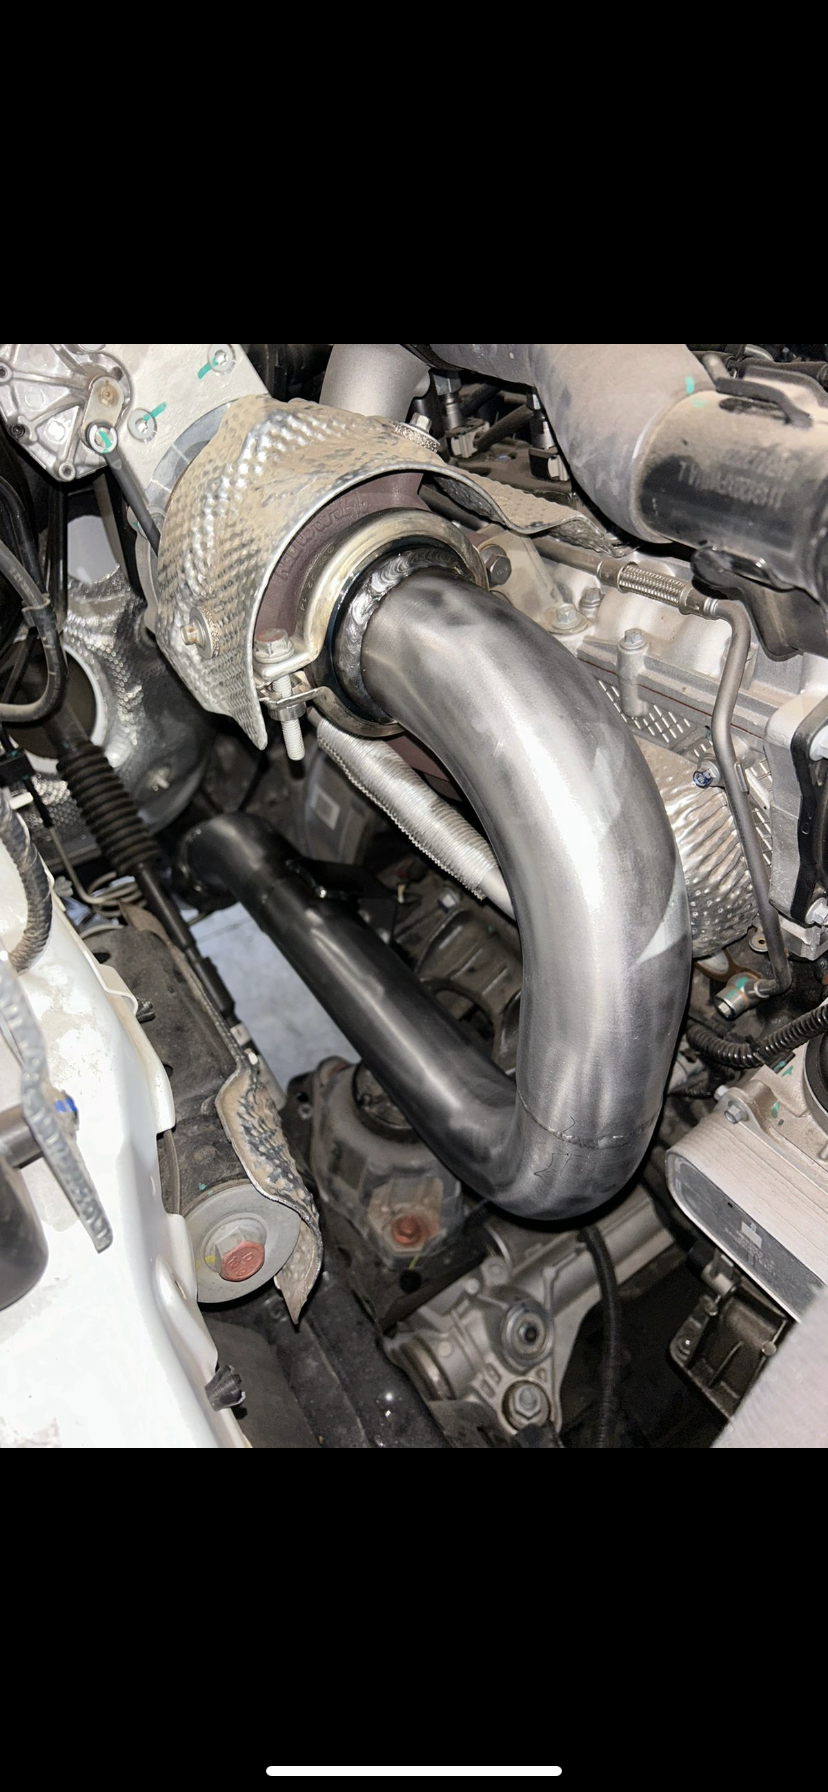 GWM p-series stainless steel full exhaust system & downpipe